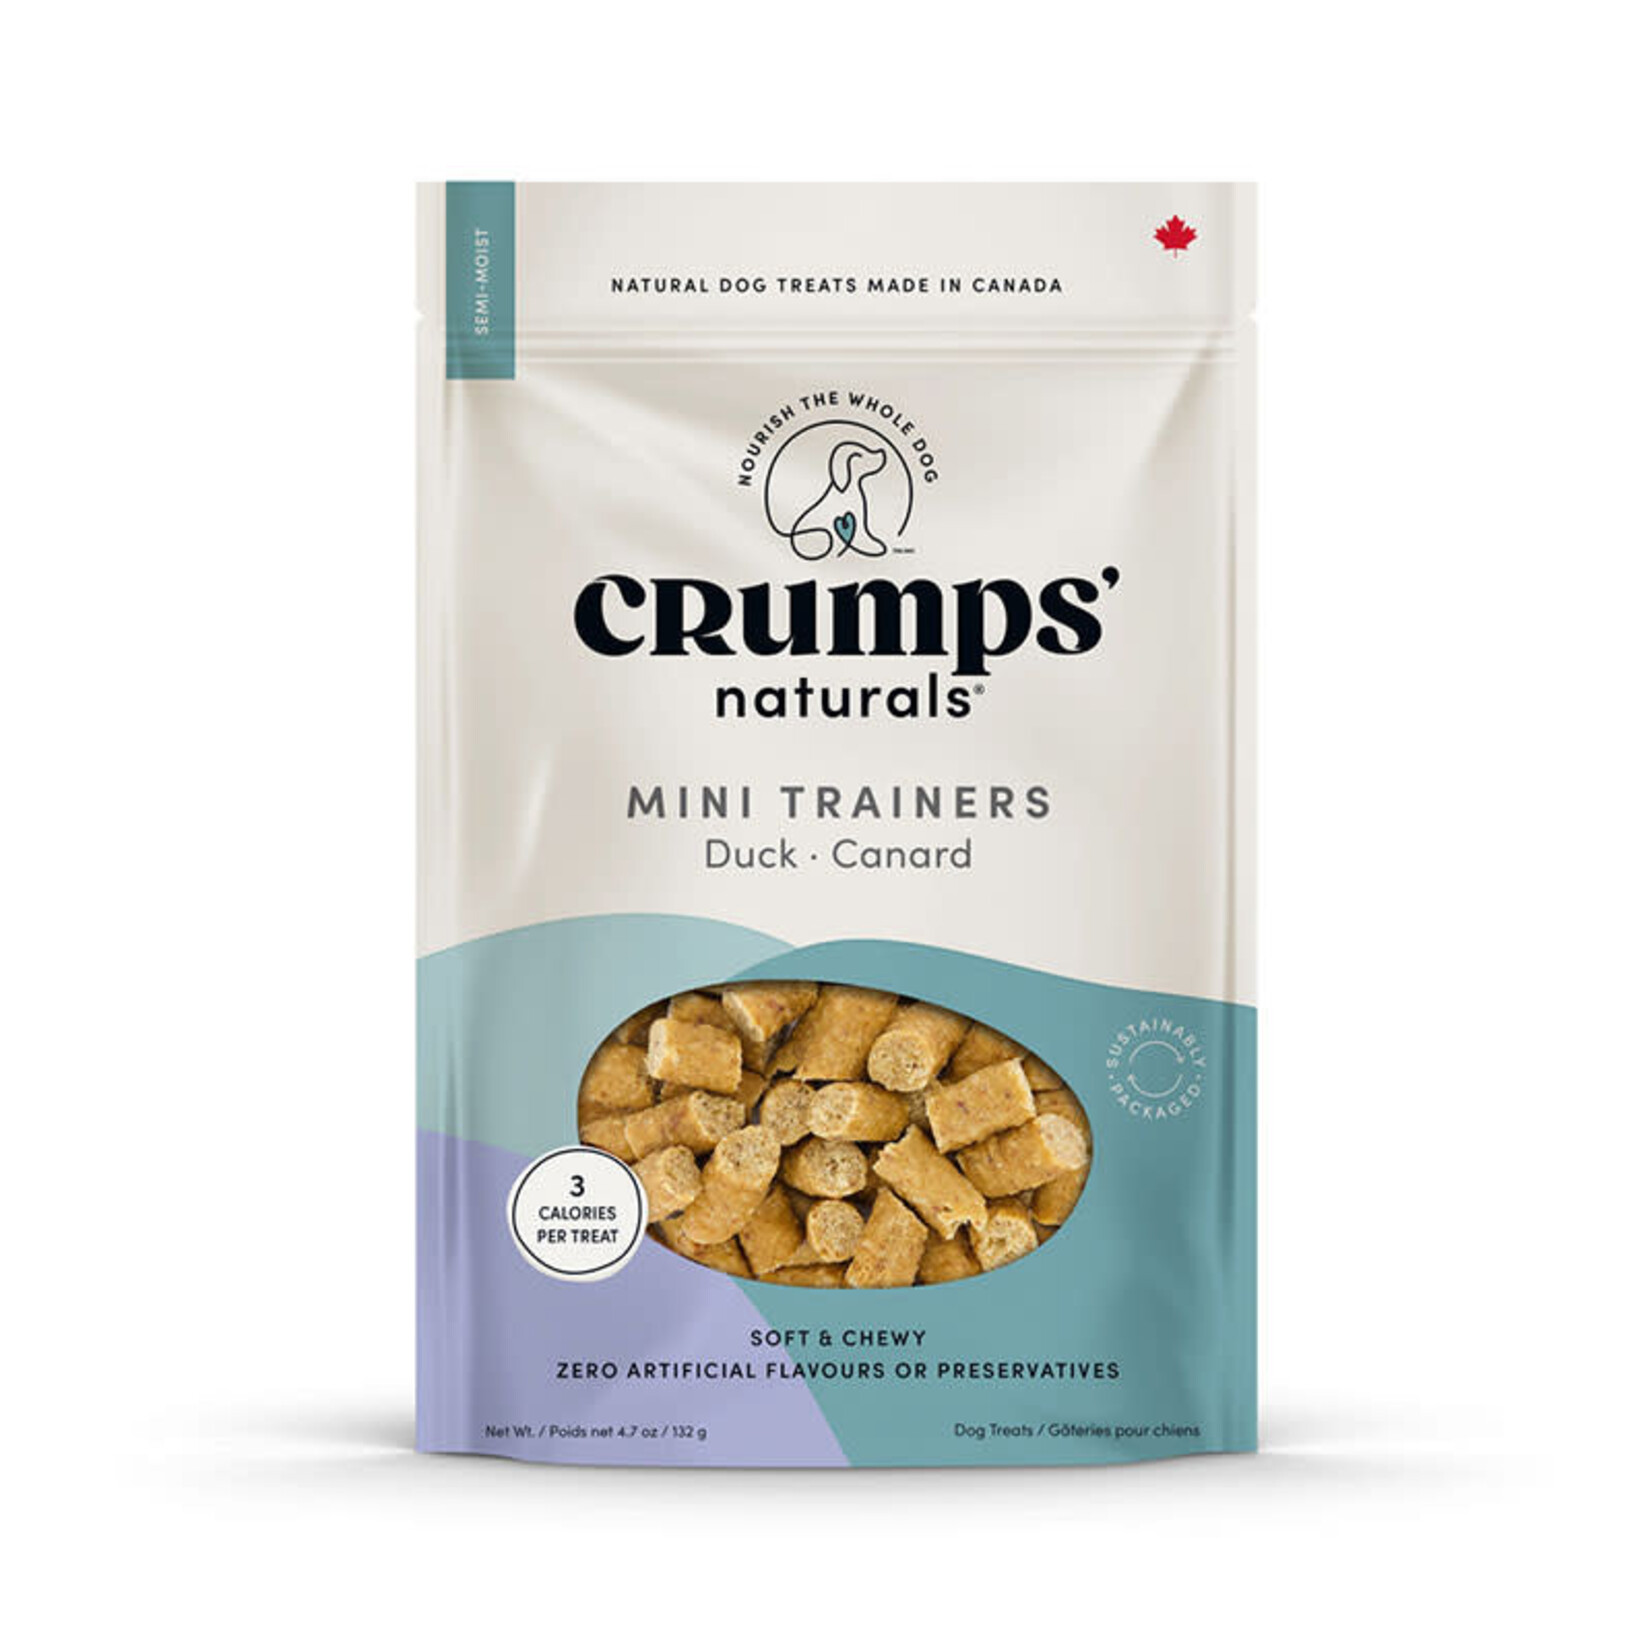 Crumps - Mini Trainers - Soft & Chewy - Duck